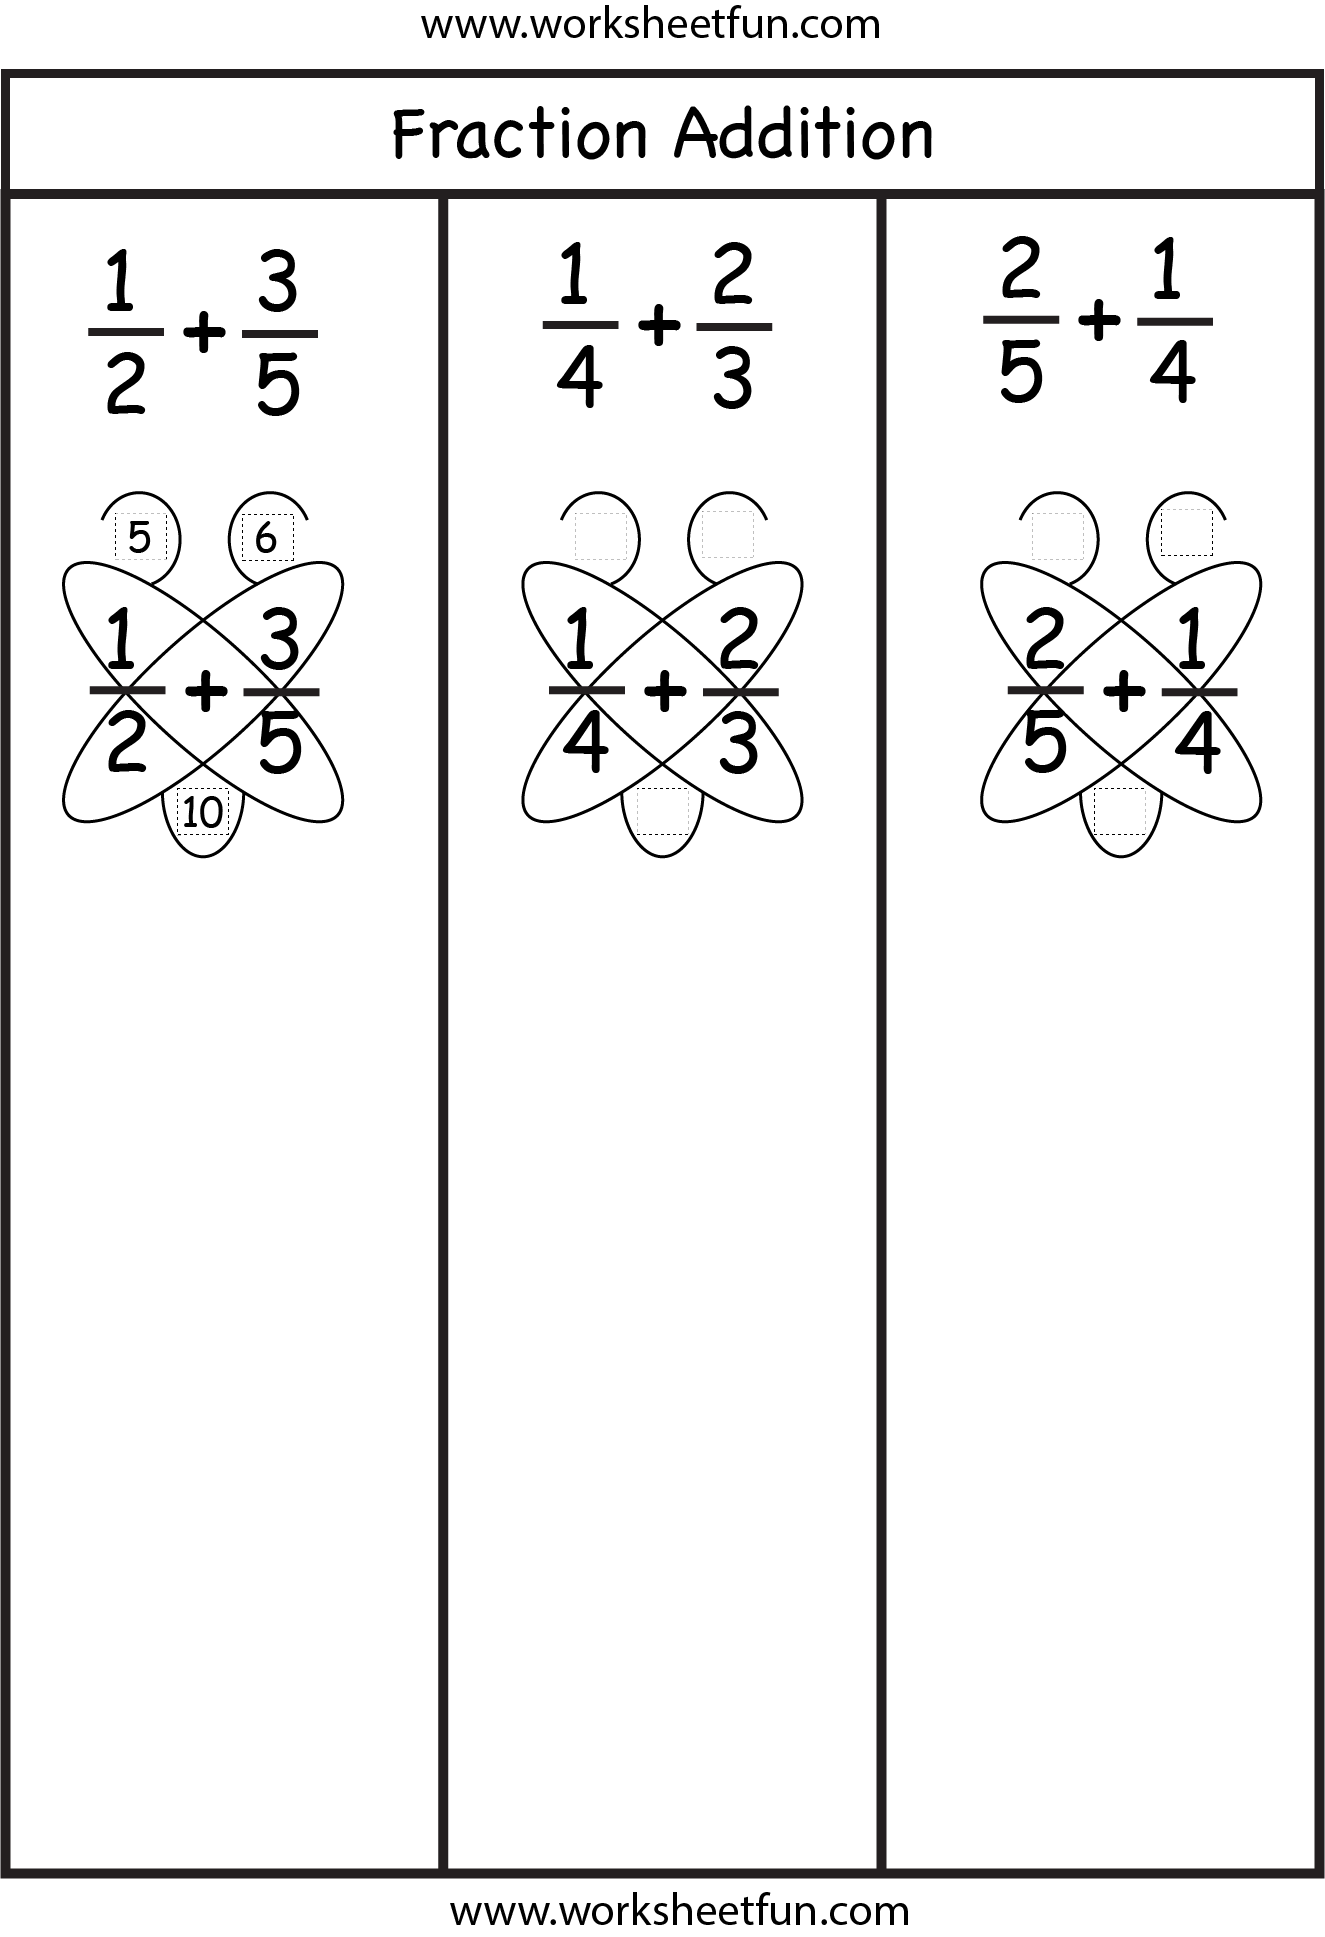 Fraction Addition – Butterfly Method / FREE Printable Worksheets With Adding Fractions Worksheet Pdf